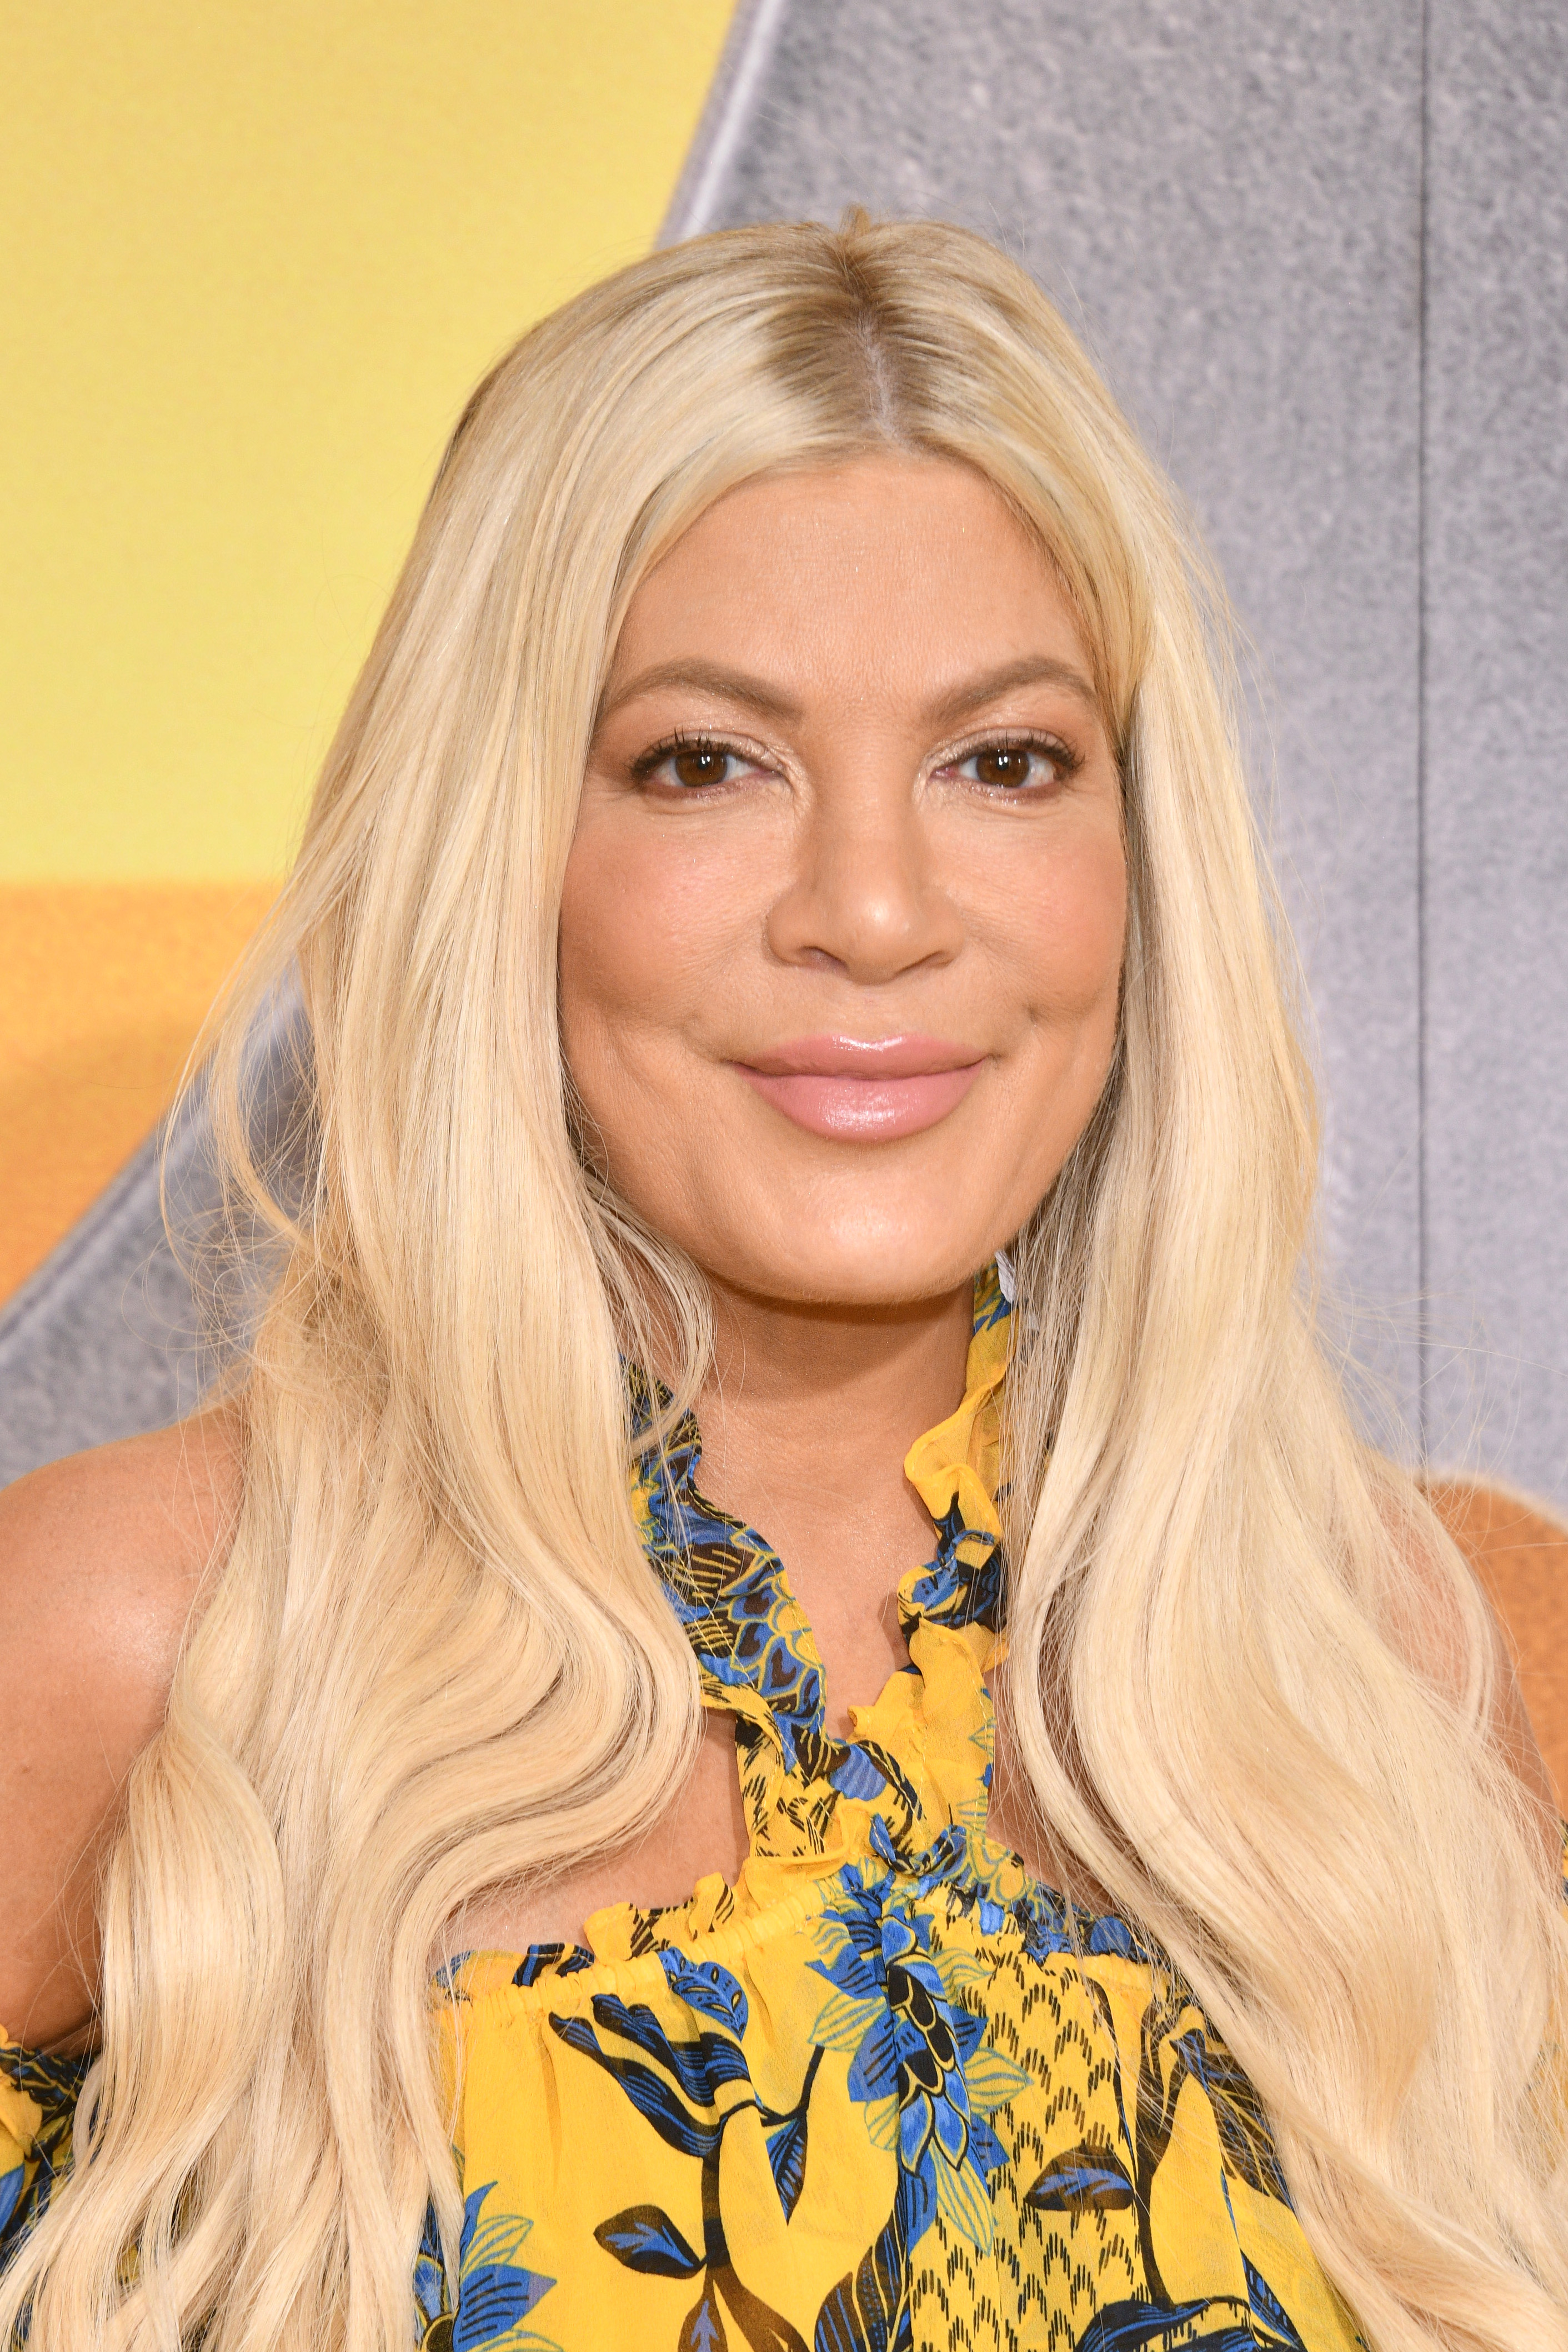 Actress Tori Spelling attends the "Minions: The Rise Of Gru" Los Angeles premiere on June 25, 2022 in Hollywood, California | Source: Getty Images